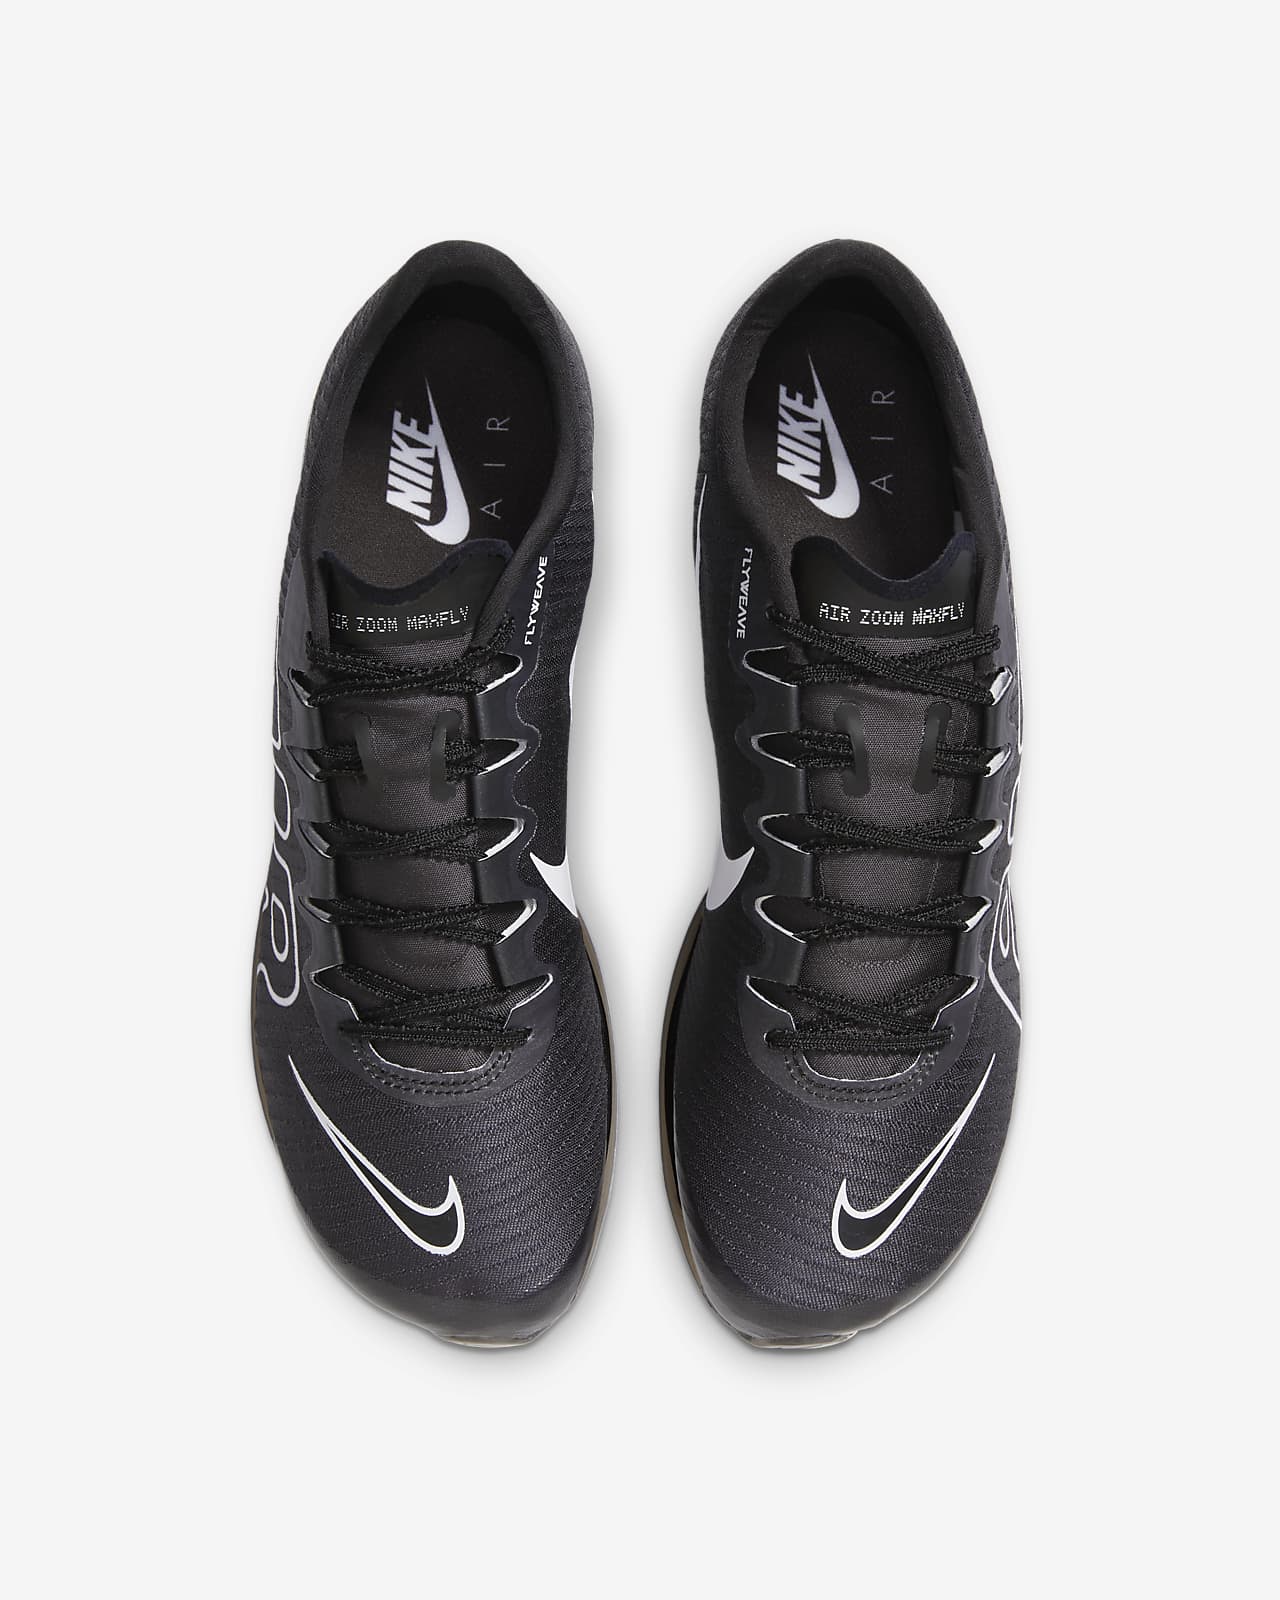 Nike Air Zoom Maxfly More Uptempo Athletics Sprinting Spikes. Nike CH